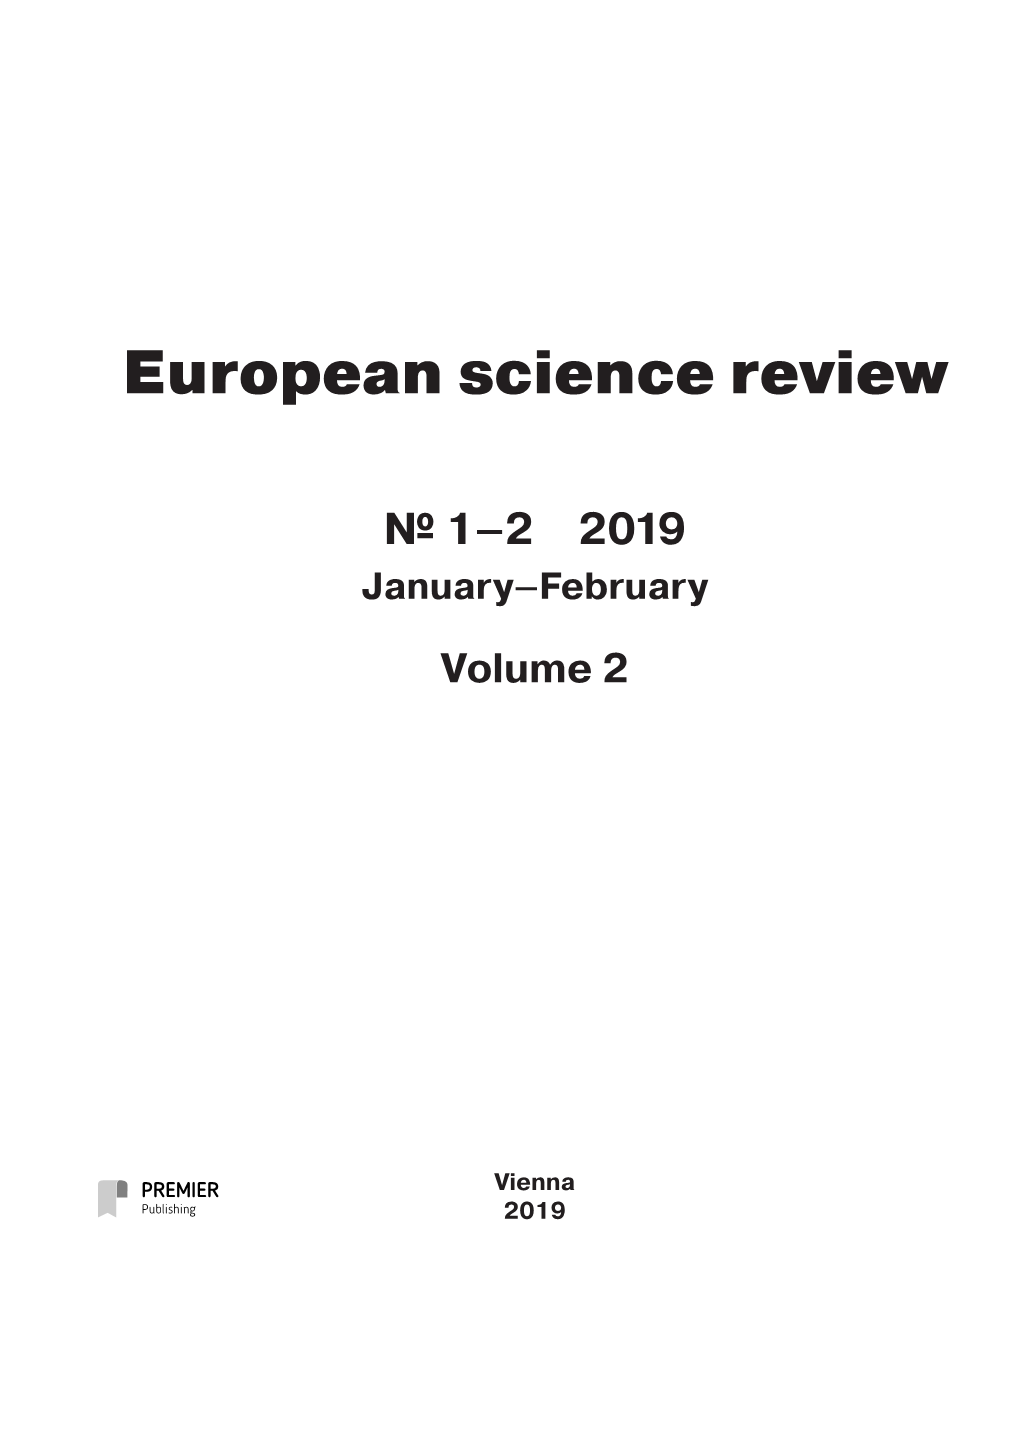 European Science Review